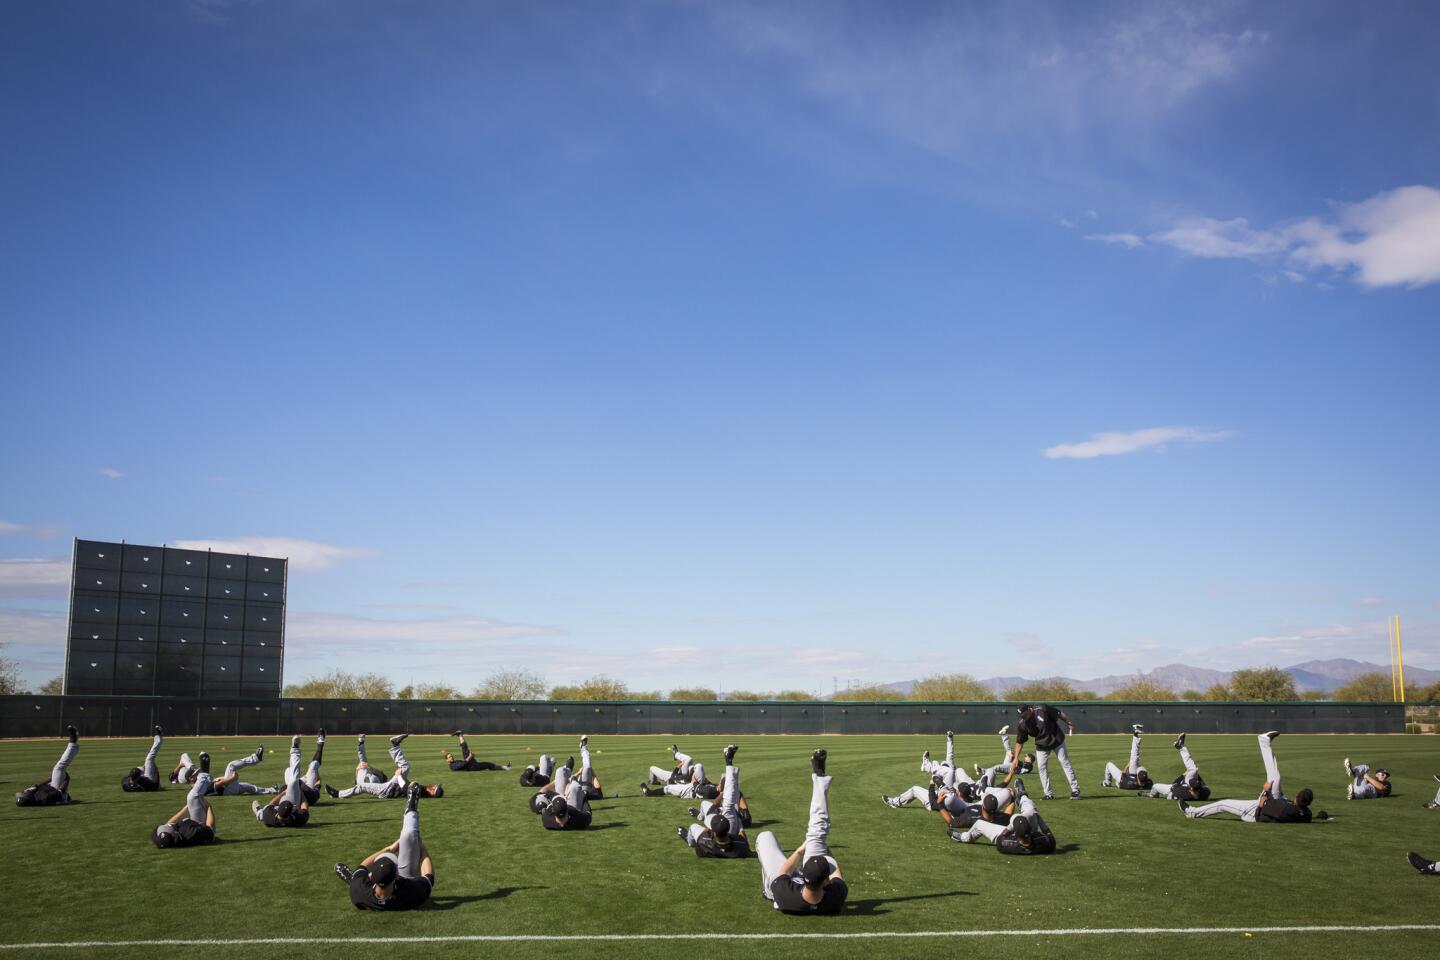 Players stretch at practice.